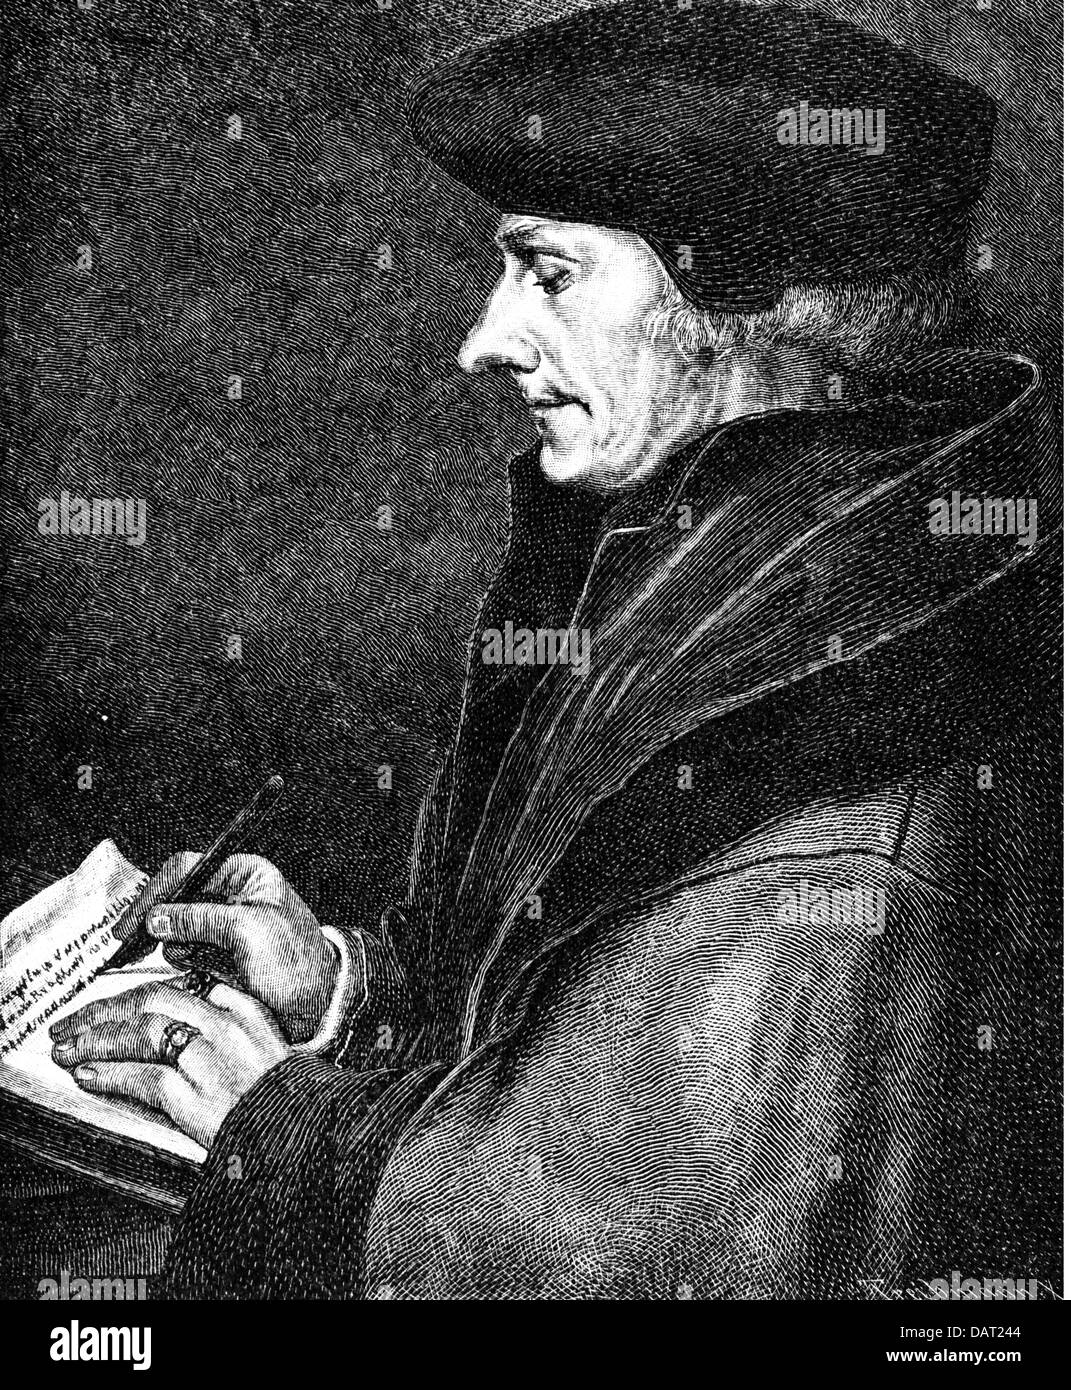 Roman scholars painting Black and White Stock Photos & Images - Alamy